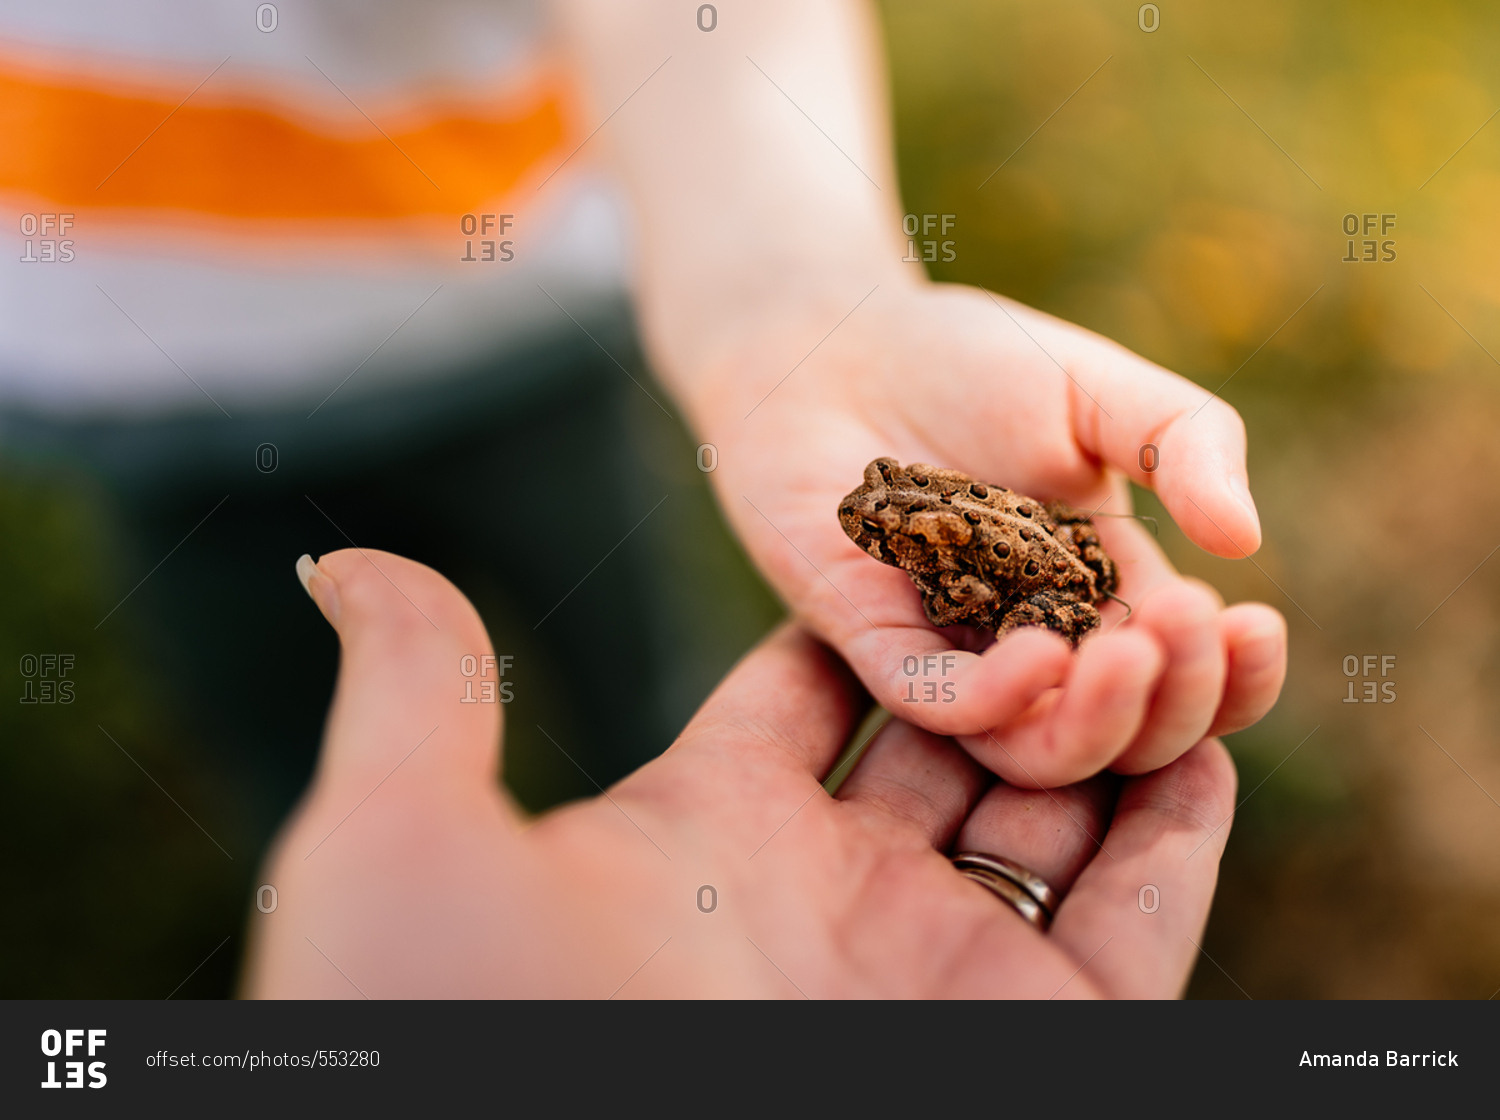 Child holding toad with mother supporting hand